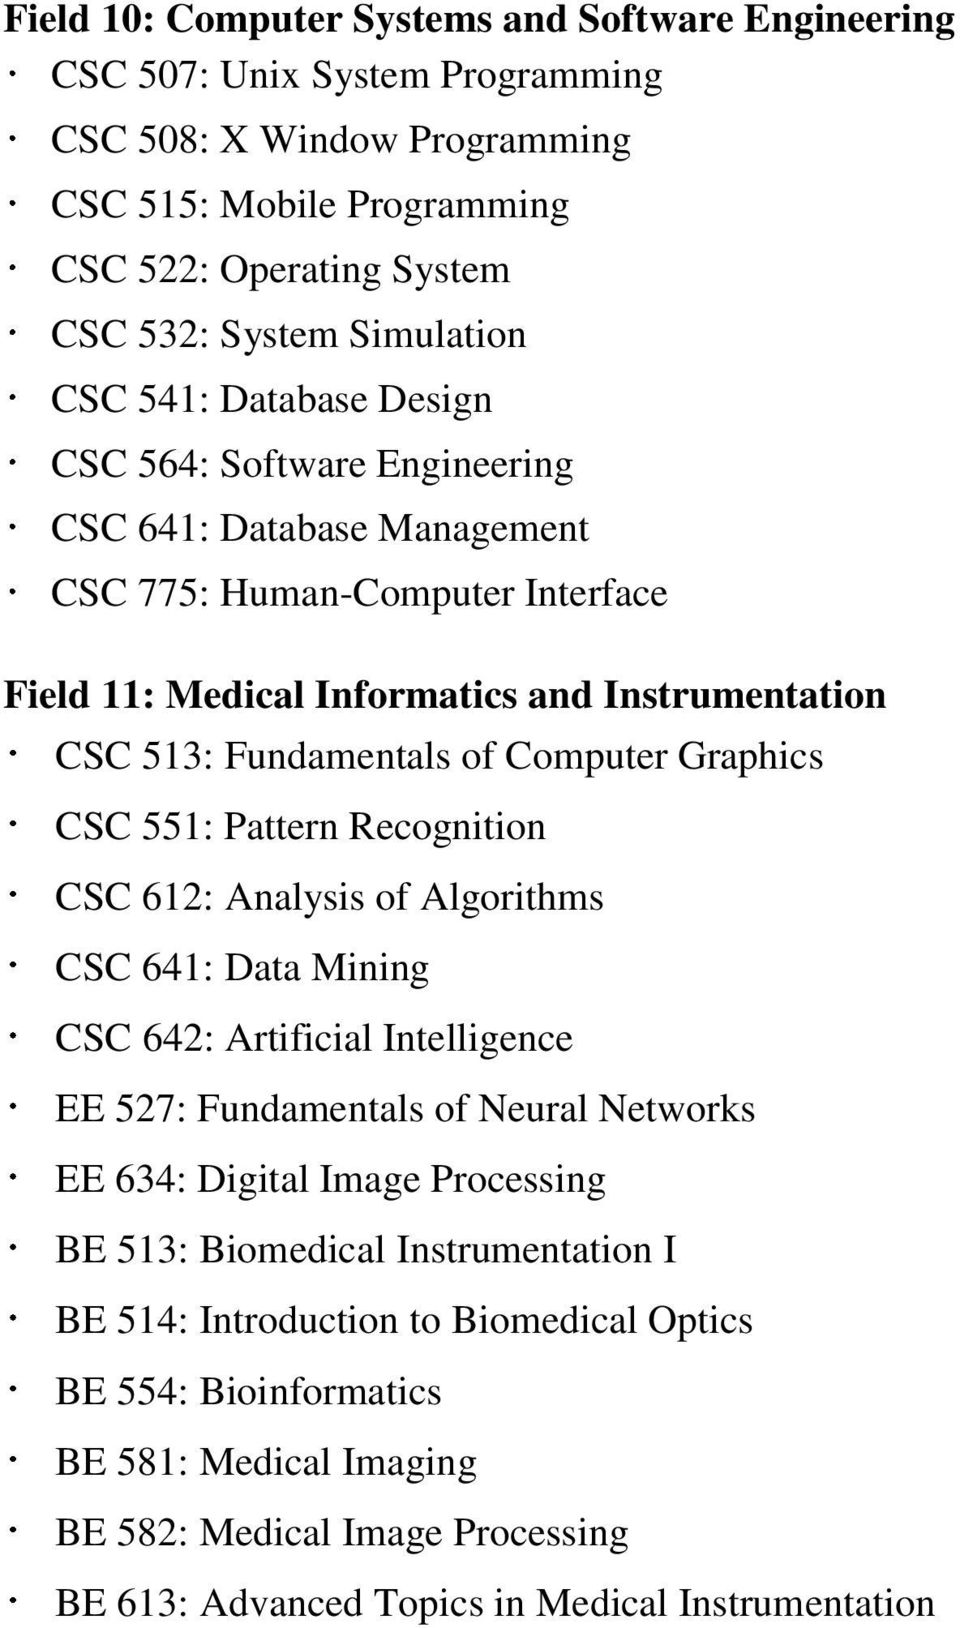 Informatics and Instrumentation CSC 513: Fundamentals of Computer Graphics CSC 612: Analysis of Algorithms EE 527: Fundamentals of Neural Networks BE 513: Biomedical